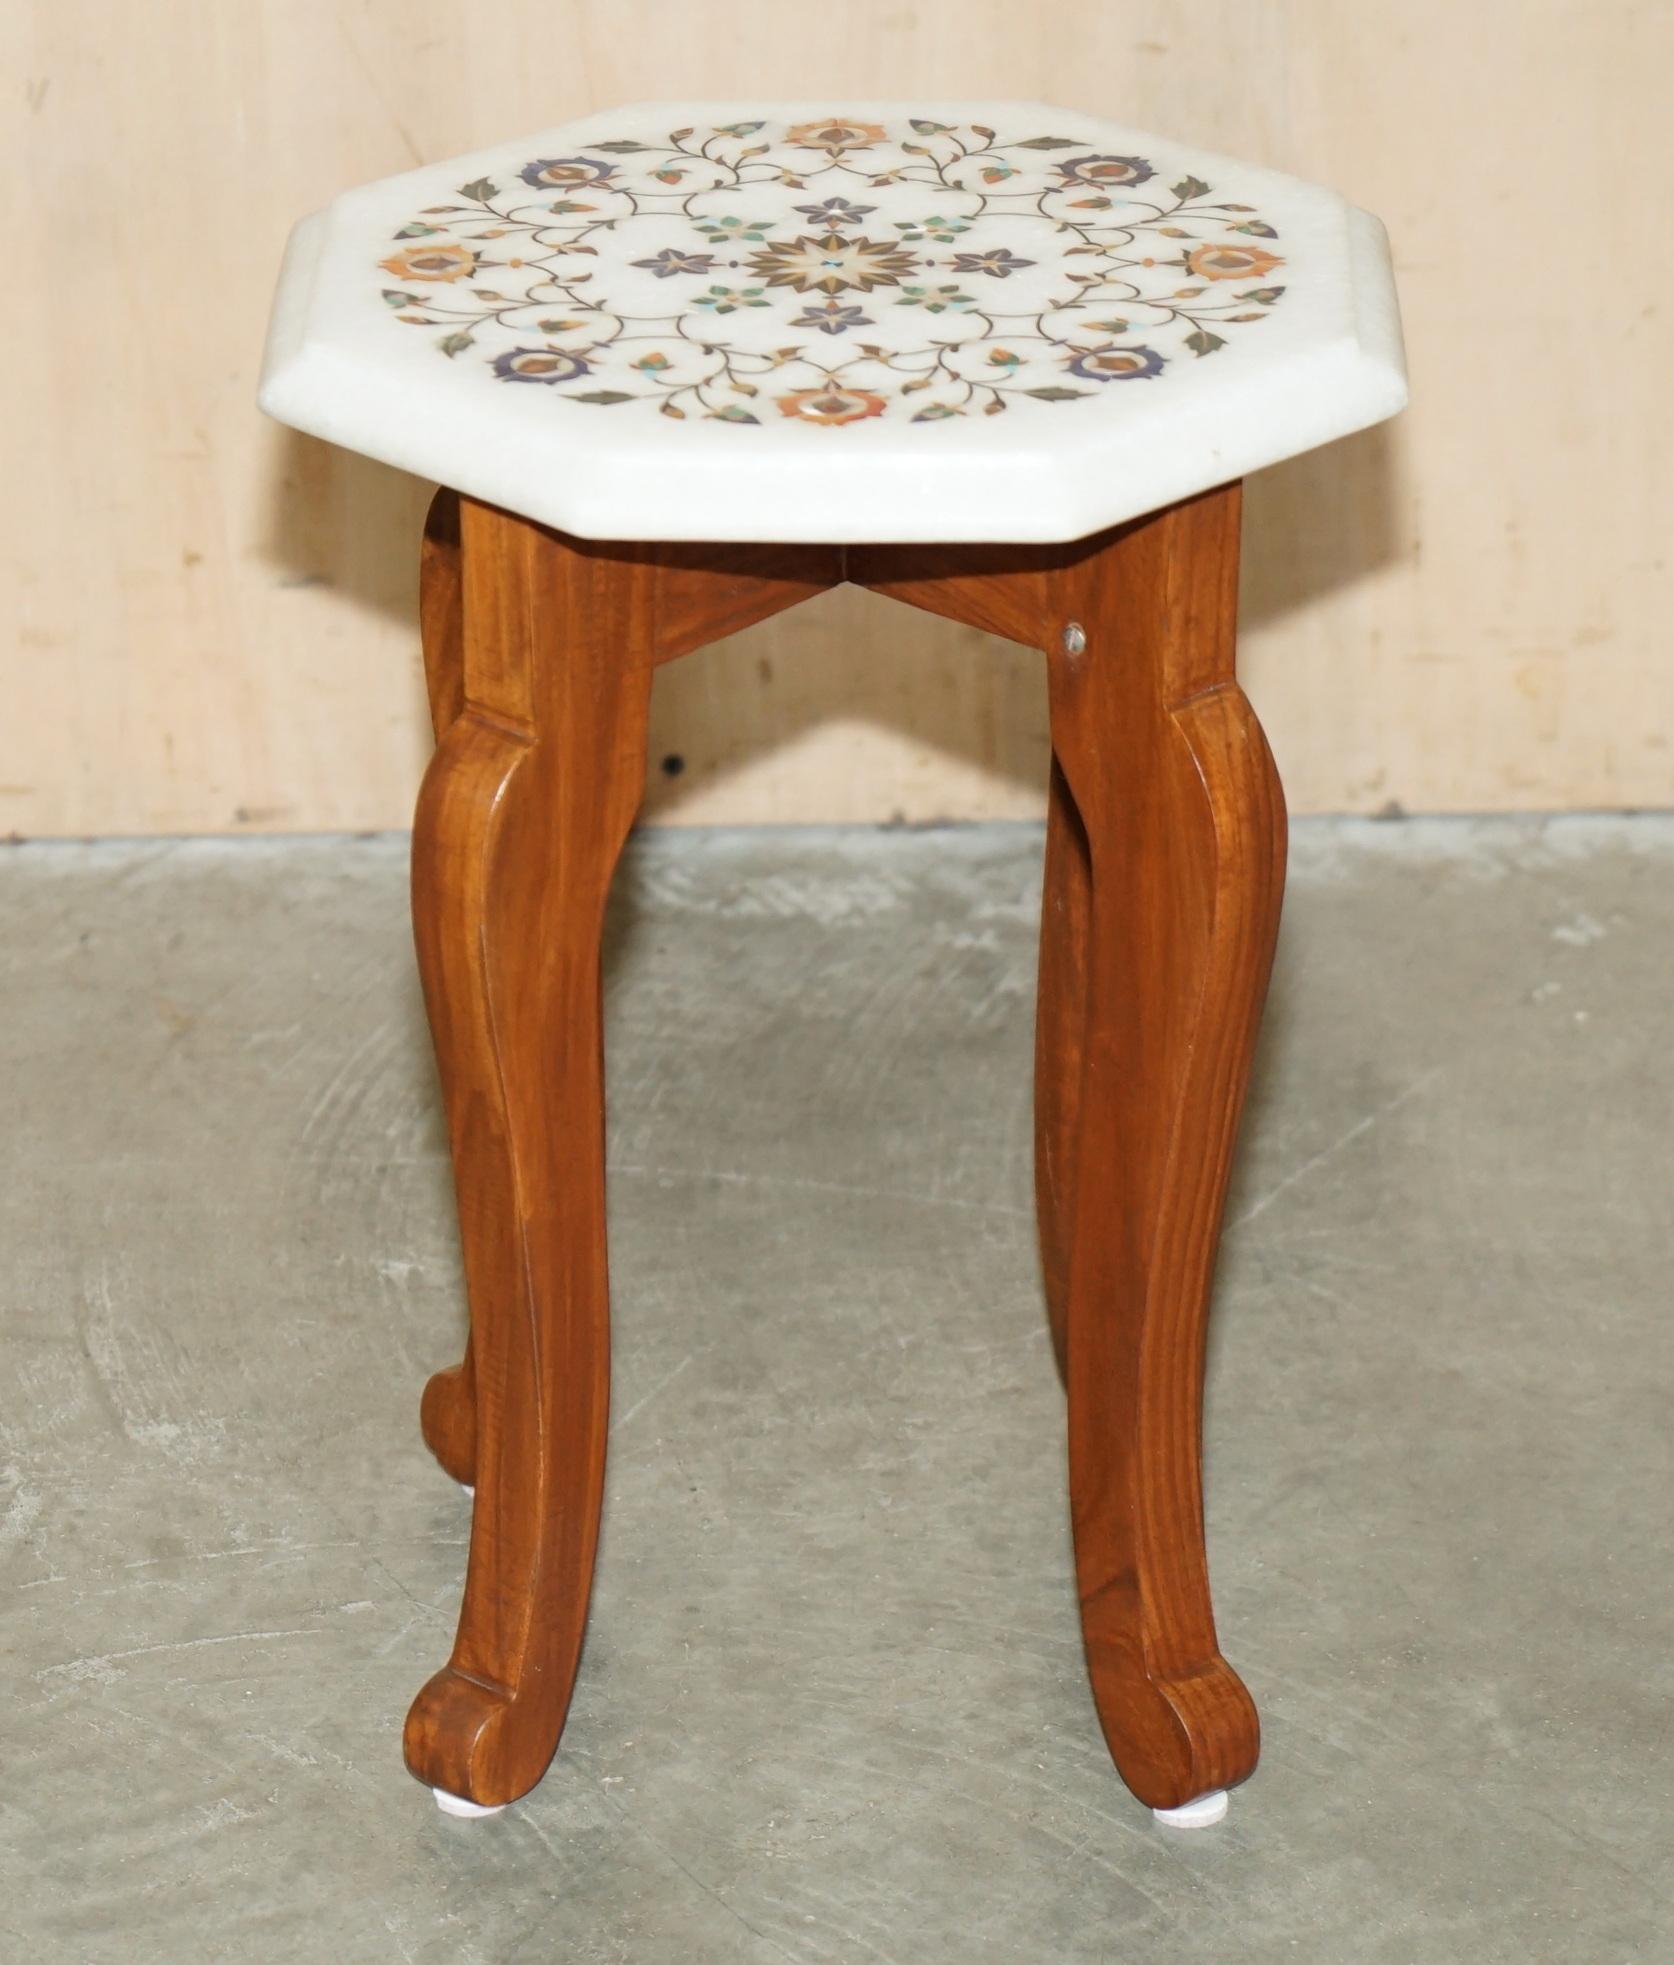 Royal House Antiques

Royal House Antiques is delighted to offer for sale this lovely hand made in India Pietra Dura marble side table with original receipt 

Please note the delivery fee listed is just a guide, it covers within the M25 only for the